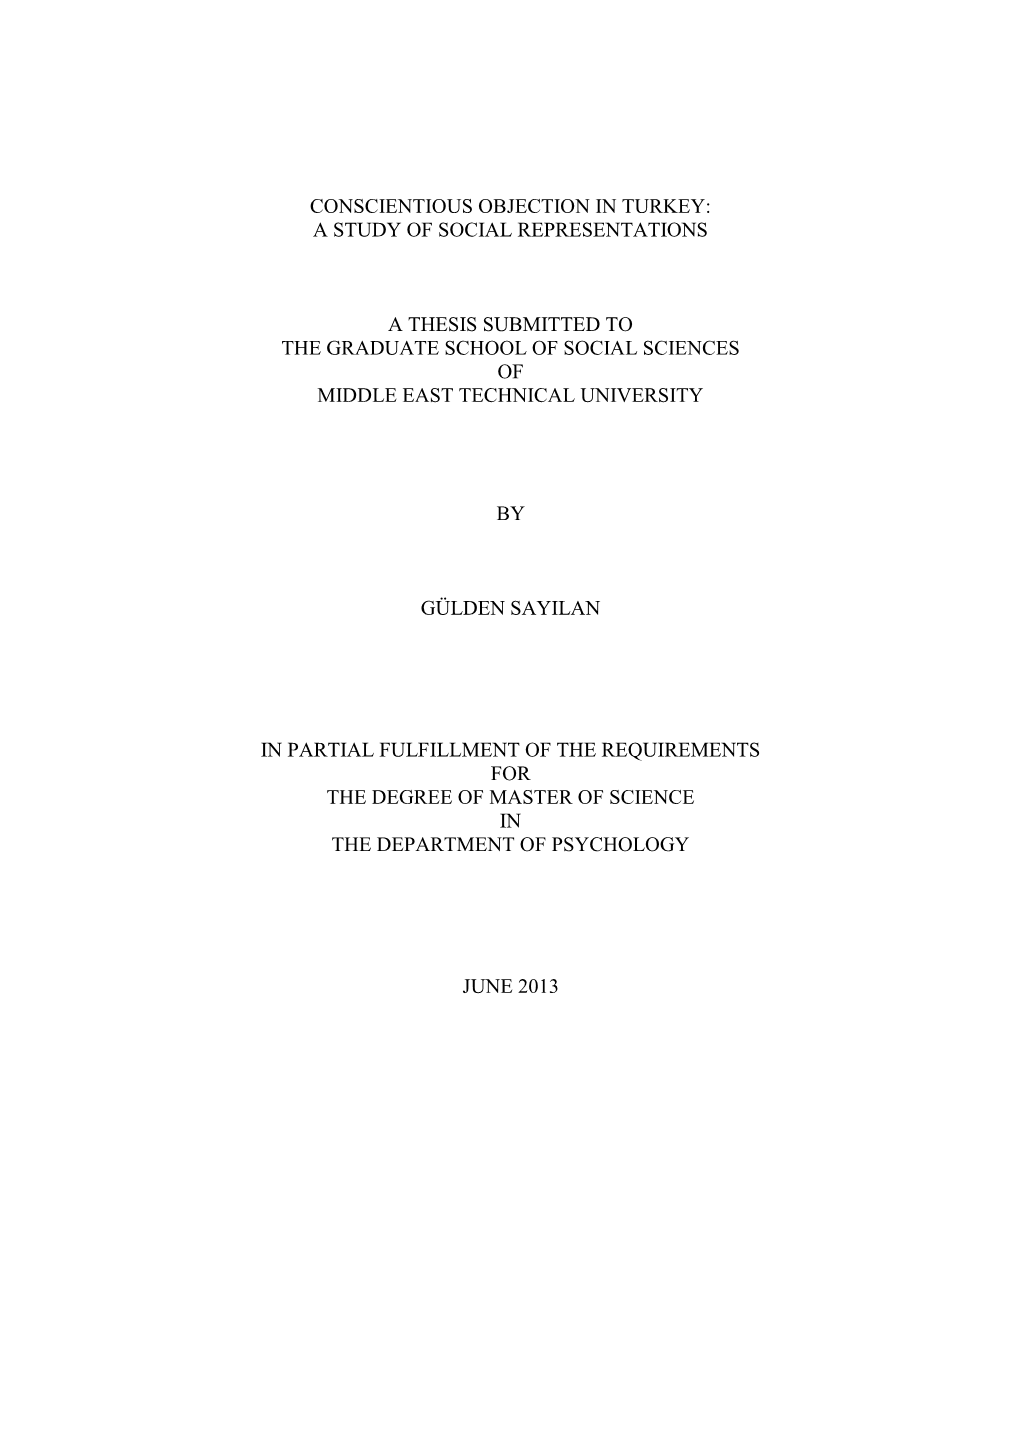 Conscientious Objection in Turkey: a Study of Social Representations a Thesis Submitted to the Graduate School of Social Scienc